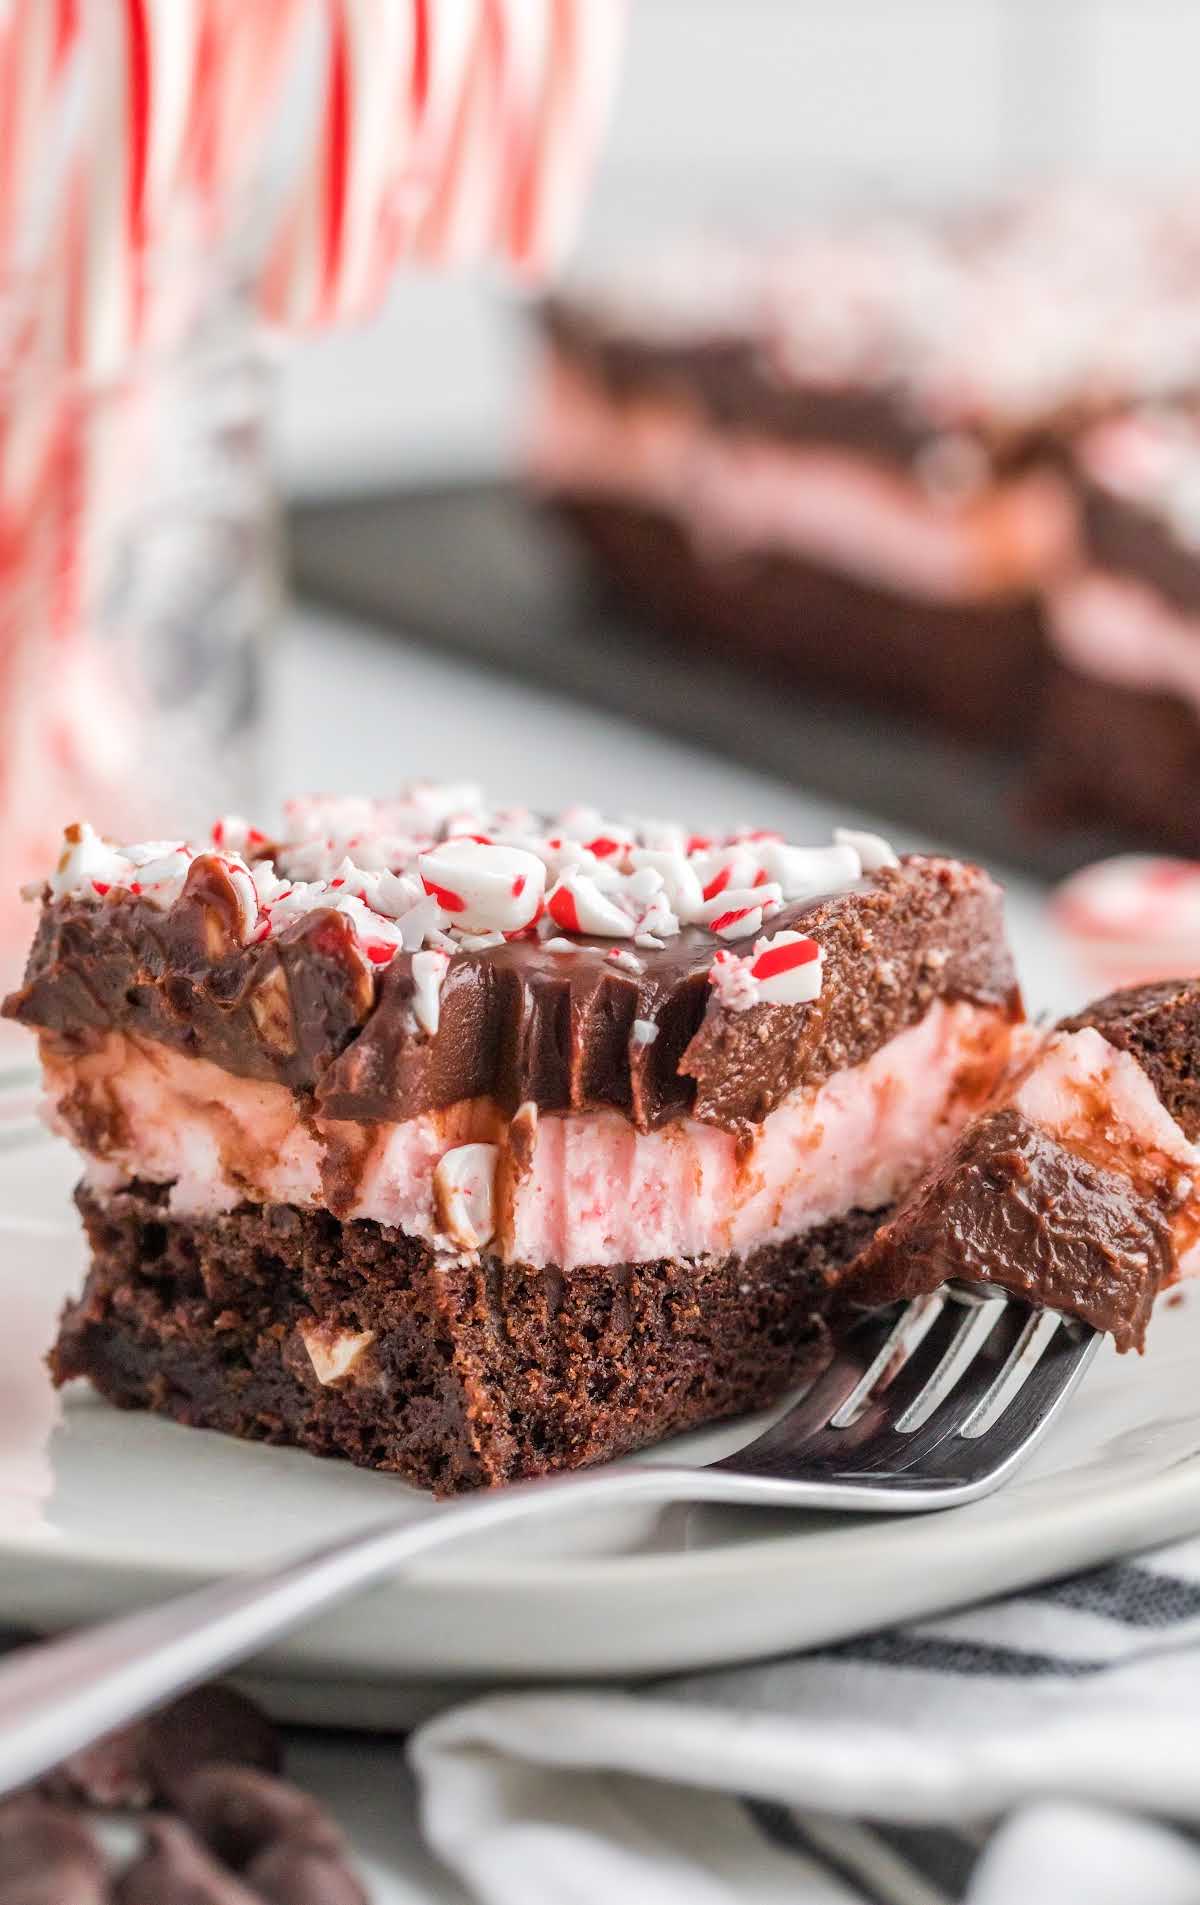 A piece of chocolate cake on a plate, with Peppermint brownies and Cream